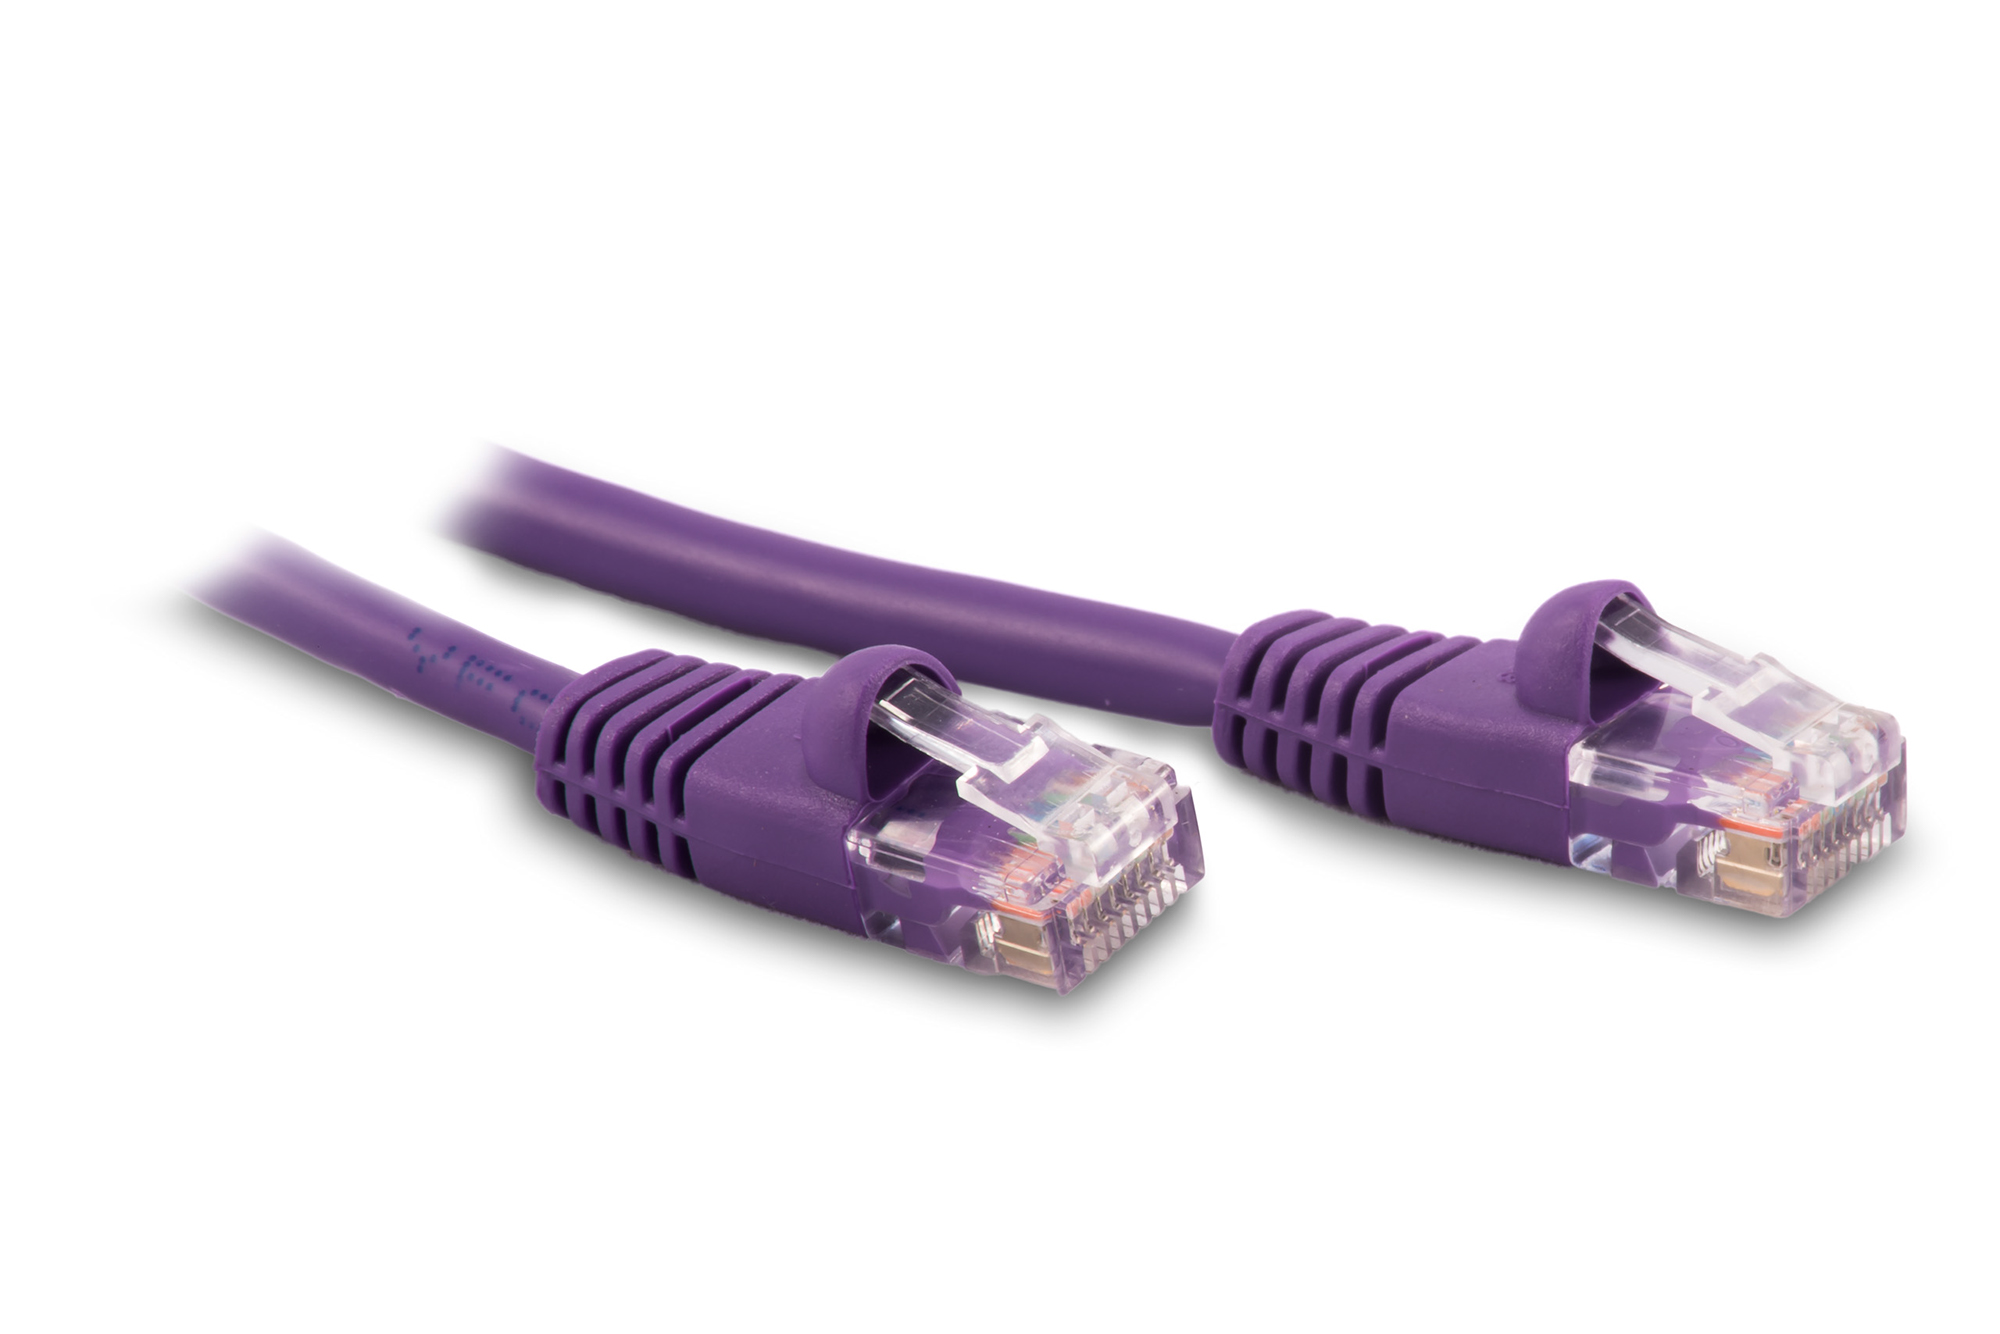 12ft Cat5e Ethernet Patch Cable - Violet Color - Snagless Boot